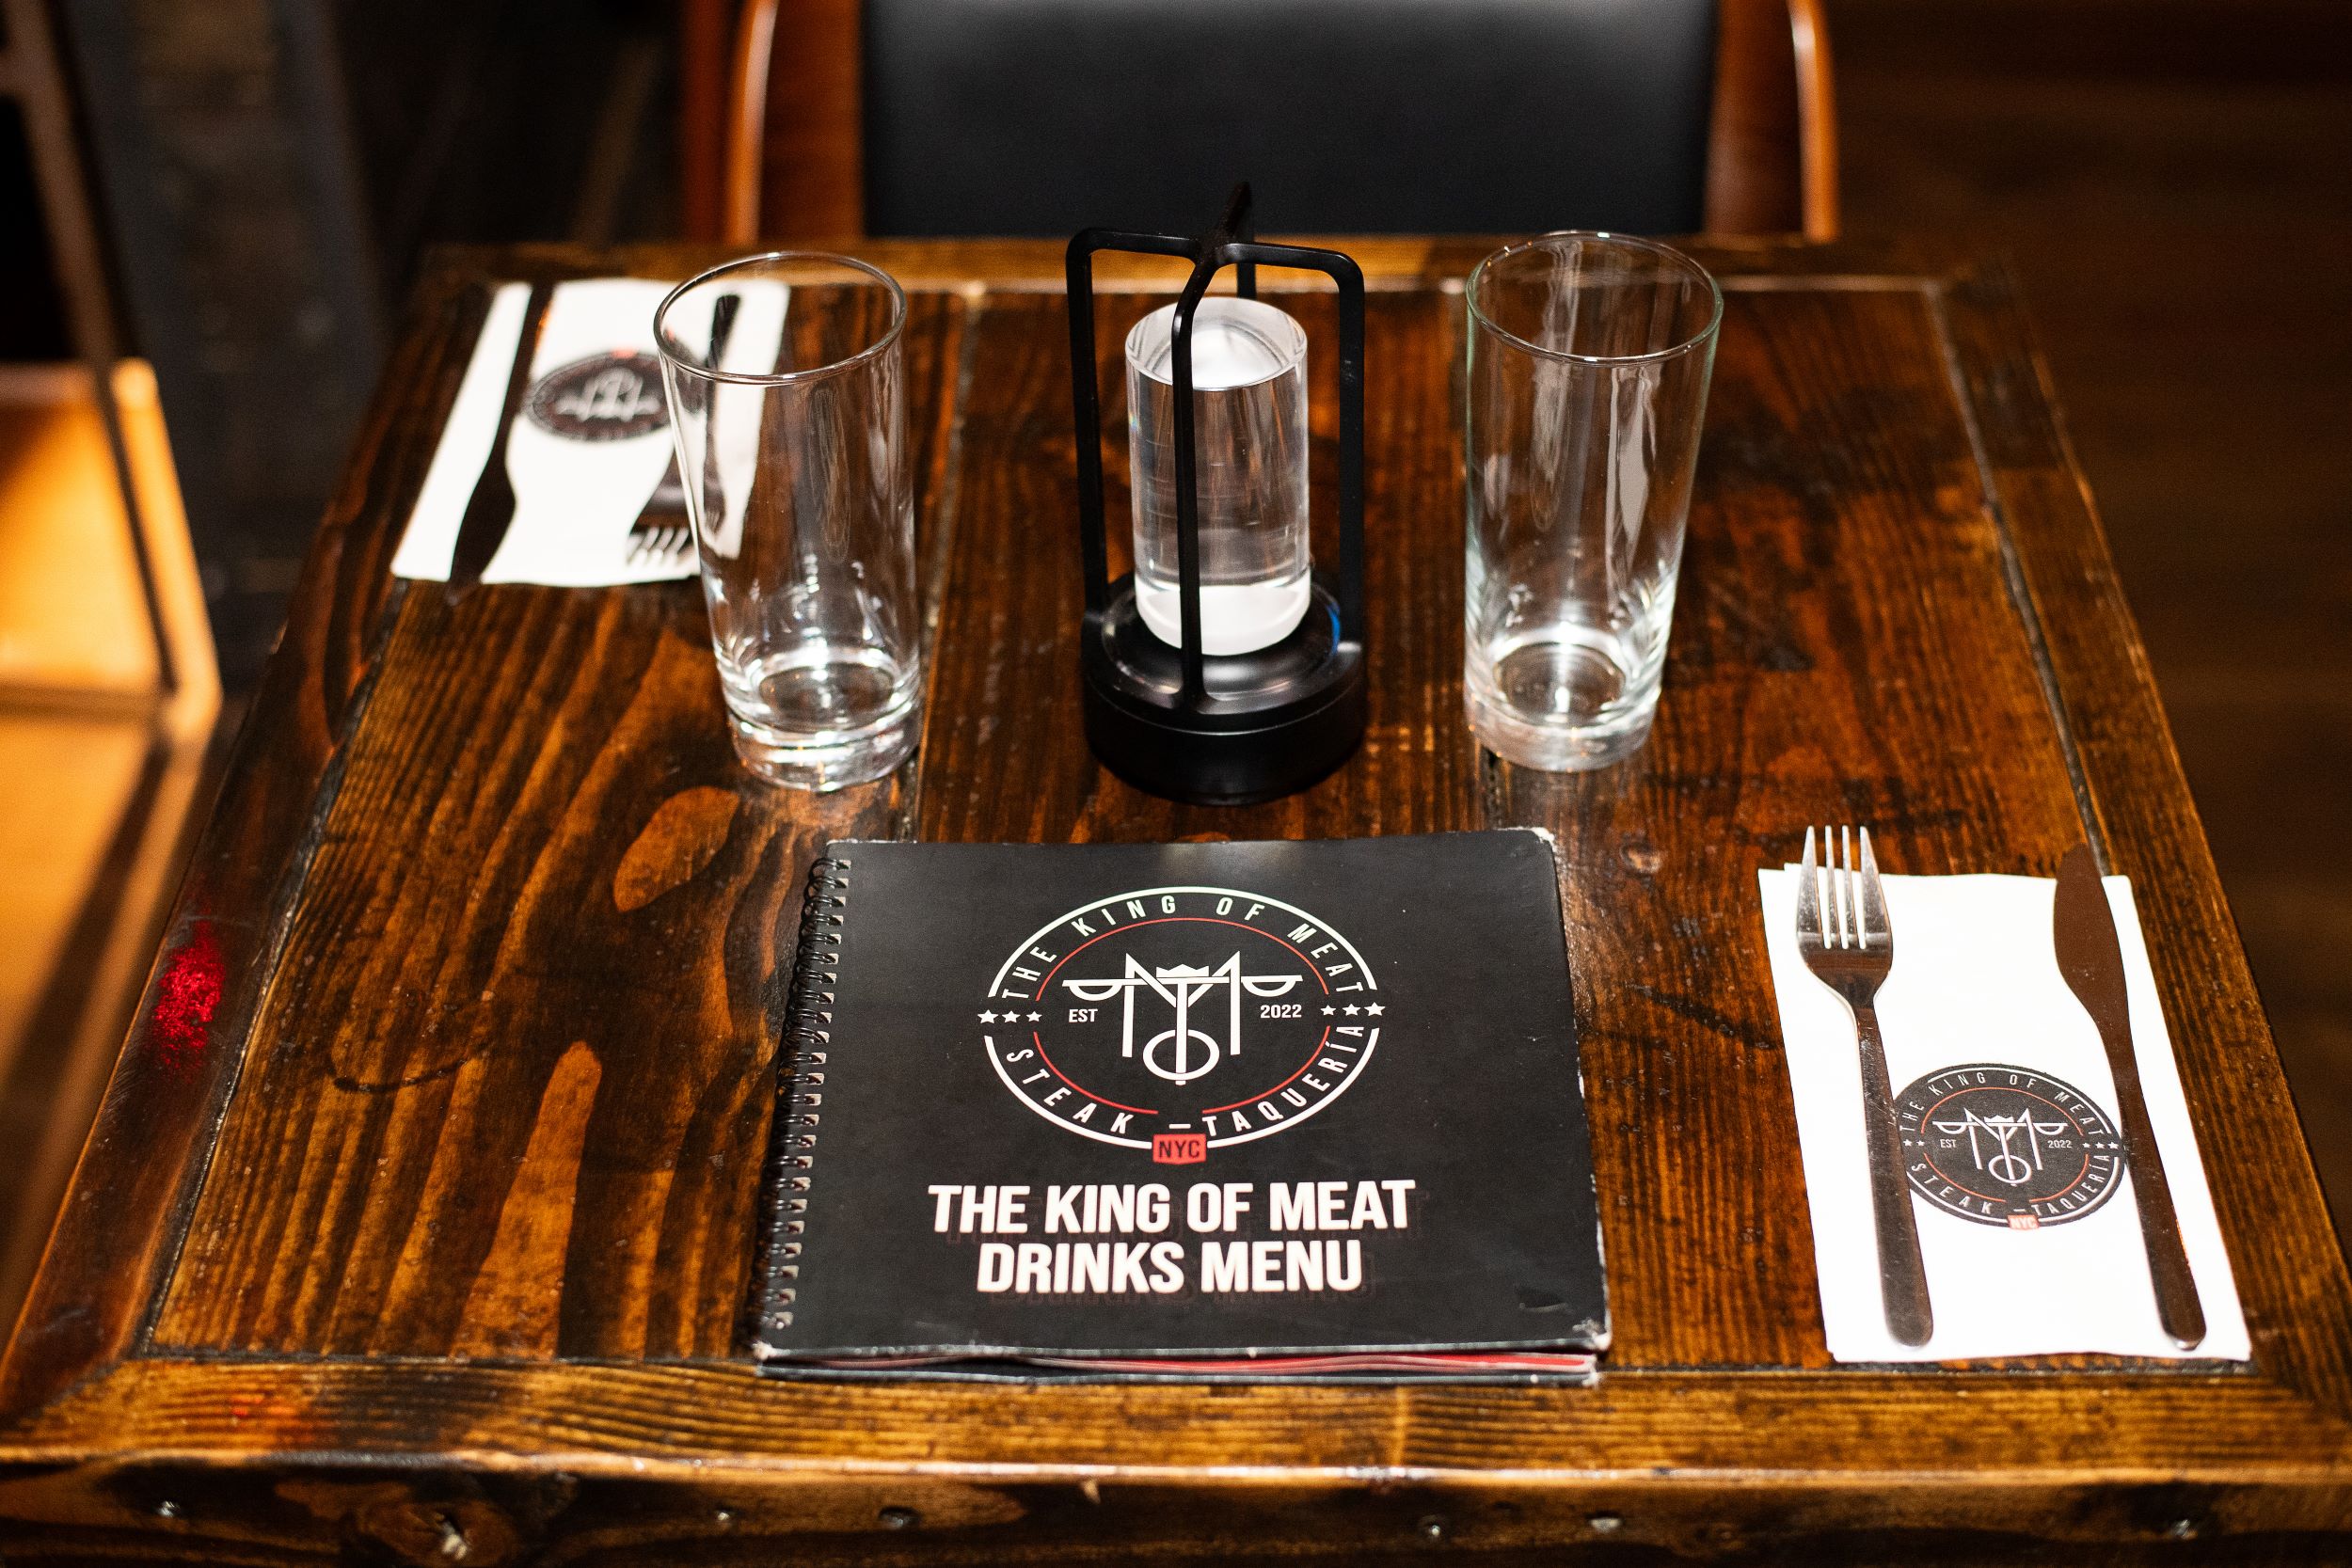 A wooden table set for two at a restaurant, featuring a drinks menu titled "the king of meat," two glasses, a lantern, and cutlery wrapped in napkins with a logo design.